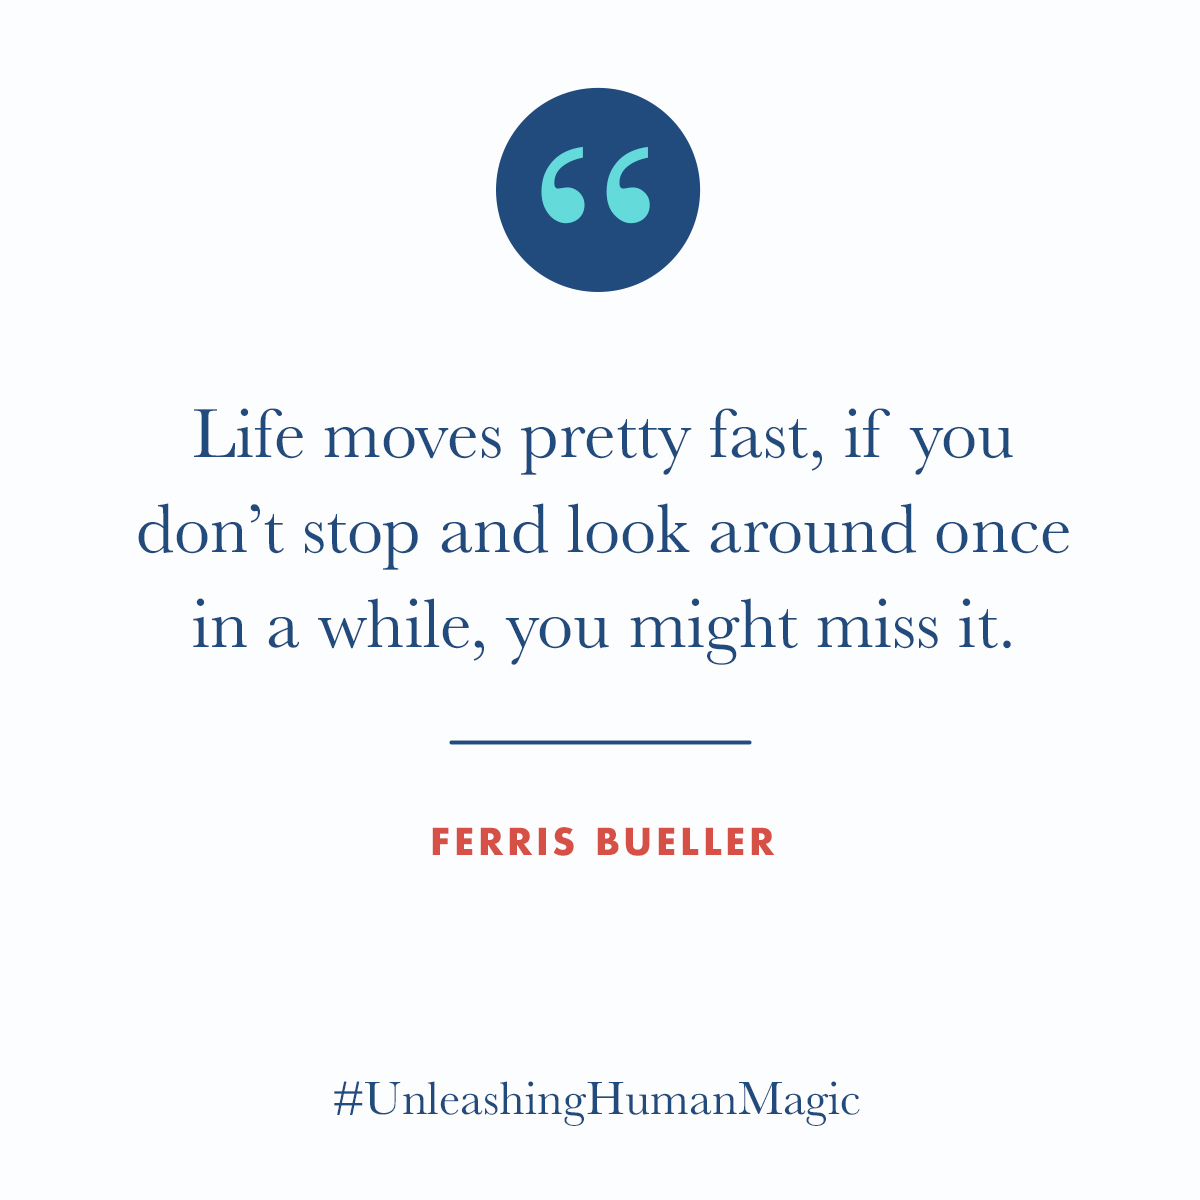 In the words of the wise and wonderful Ferris Bueller, 'Life moves pretty fast, if you don't stop and look around once in a while, you might miss it.' How are you ensuring you are sufficiently present and are paying attention to moments that matter? #UnleashingHumanMagic